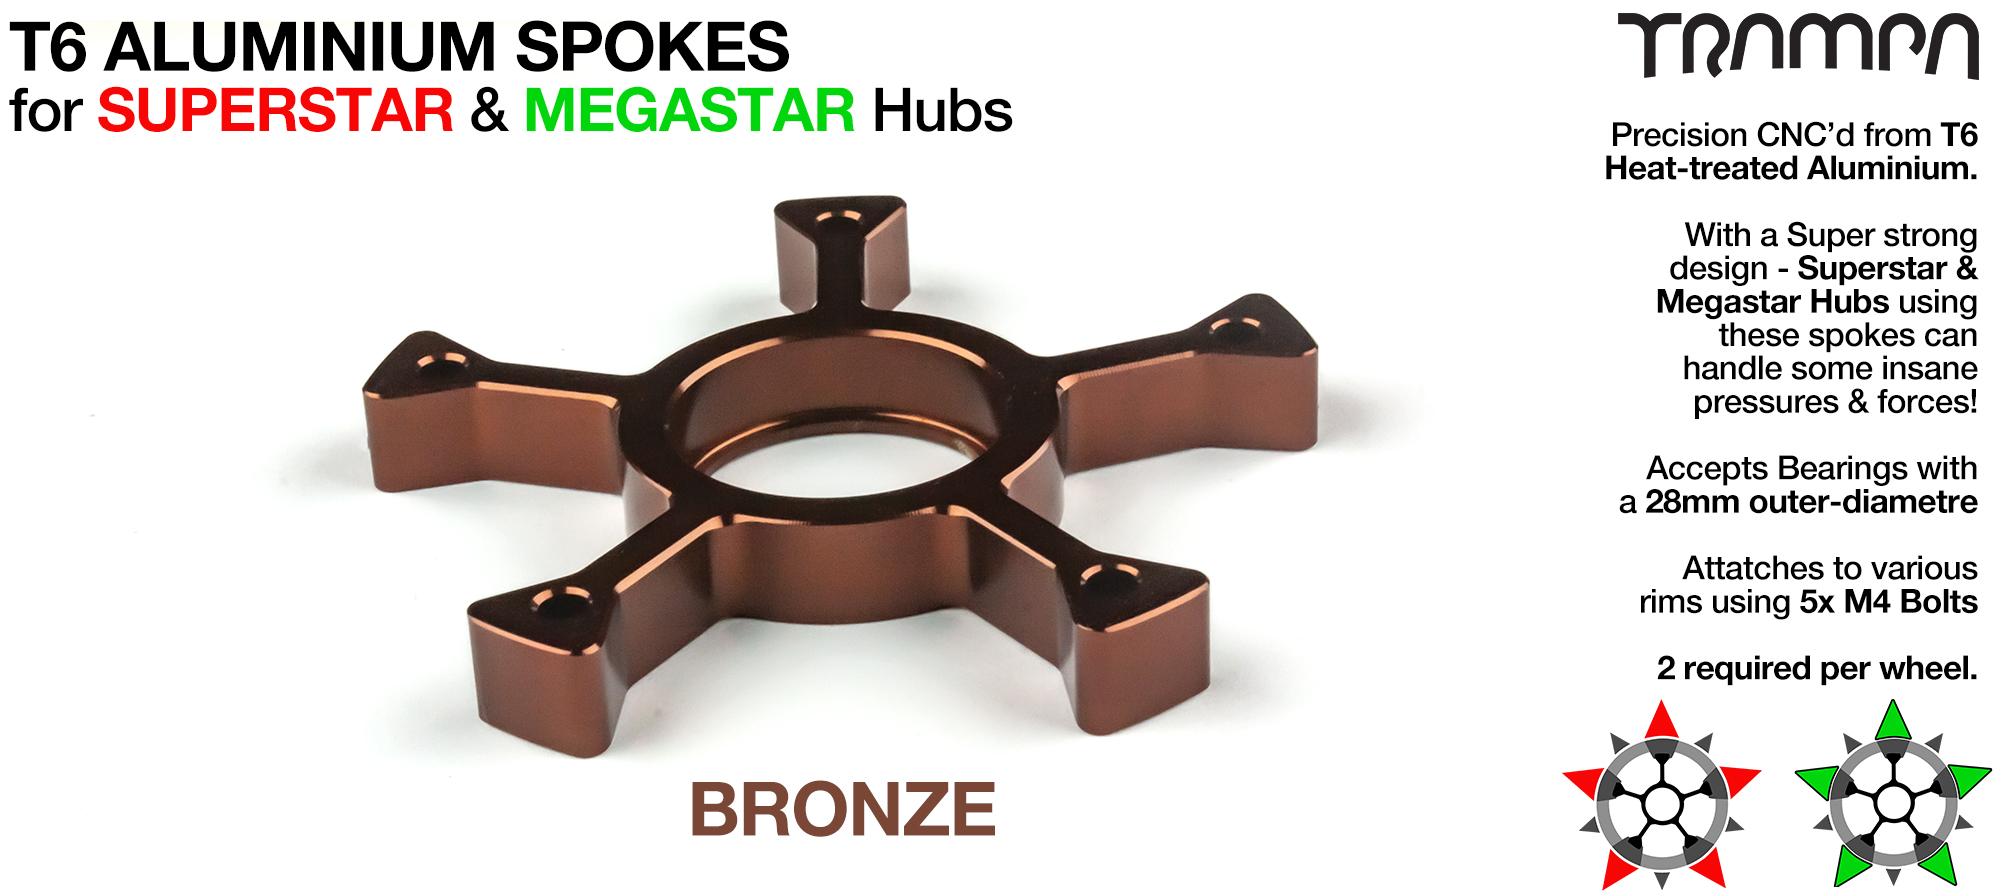 BRONZE CLASSIC Spokes on the REAR  